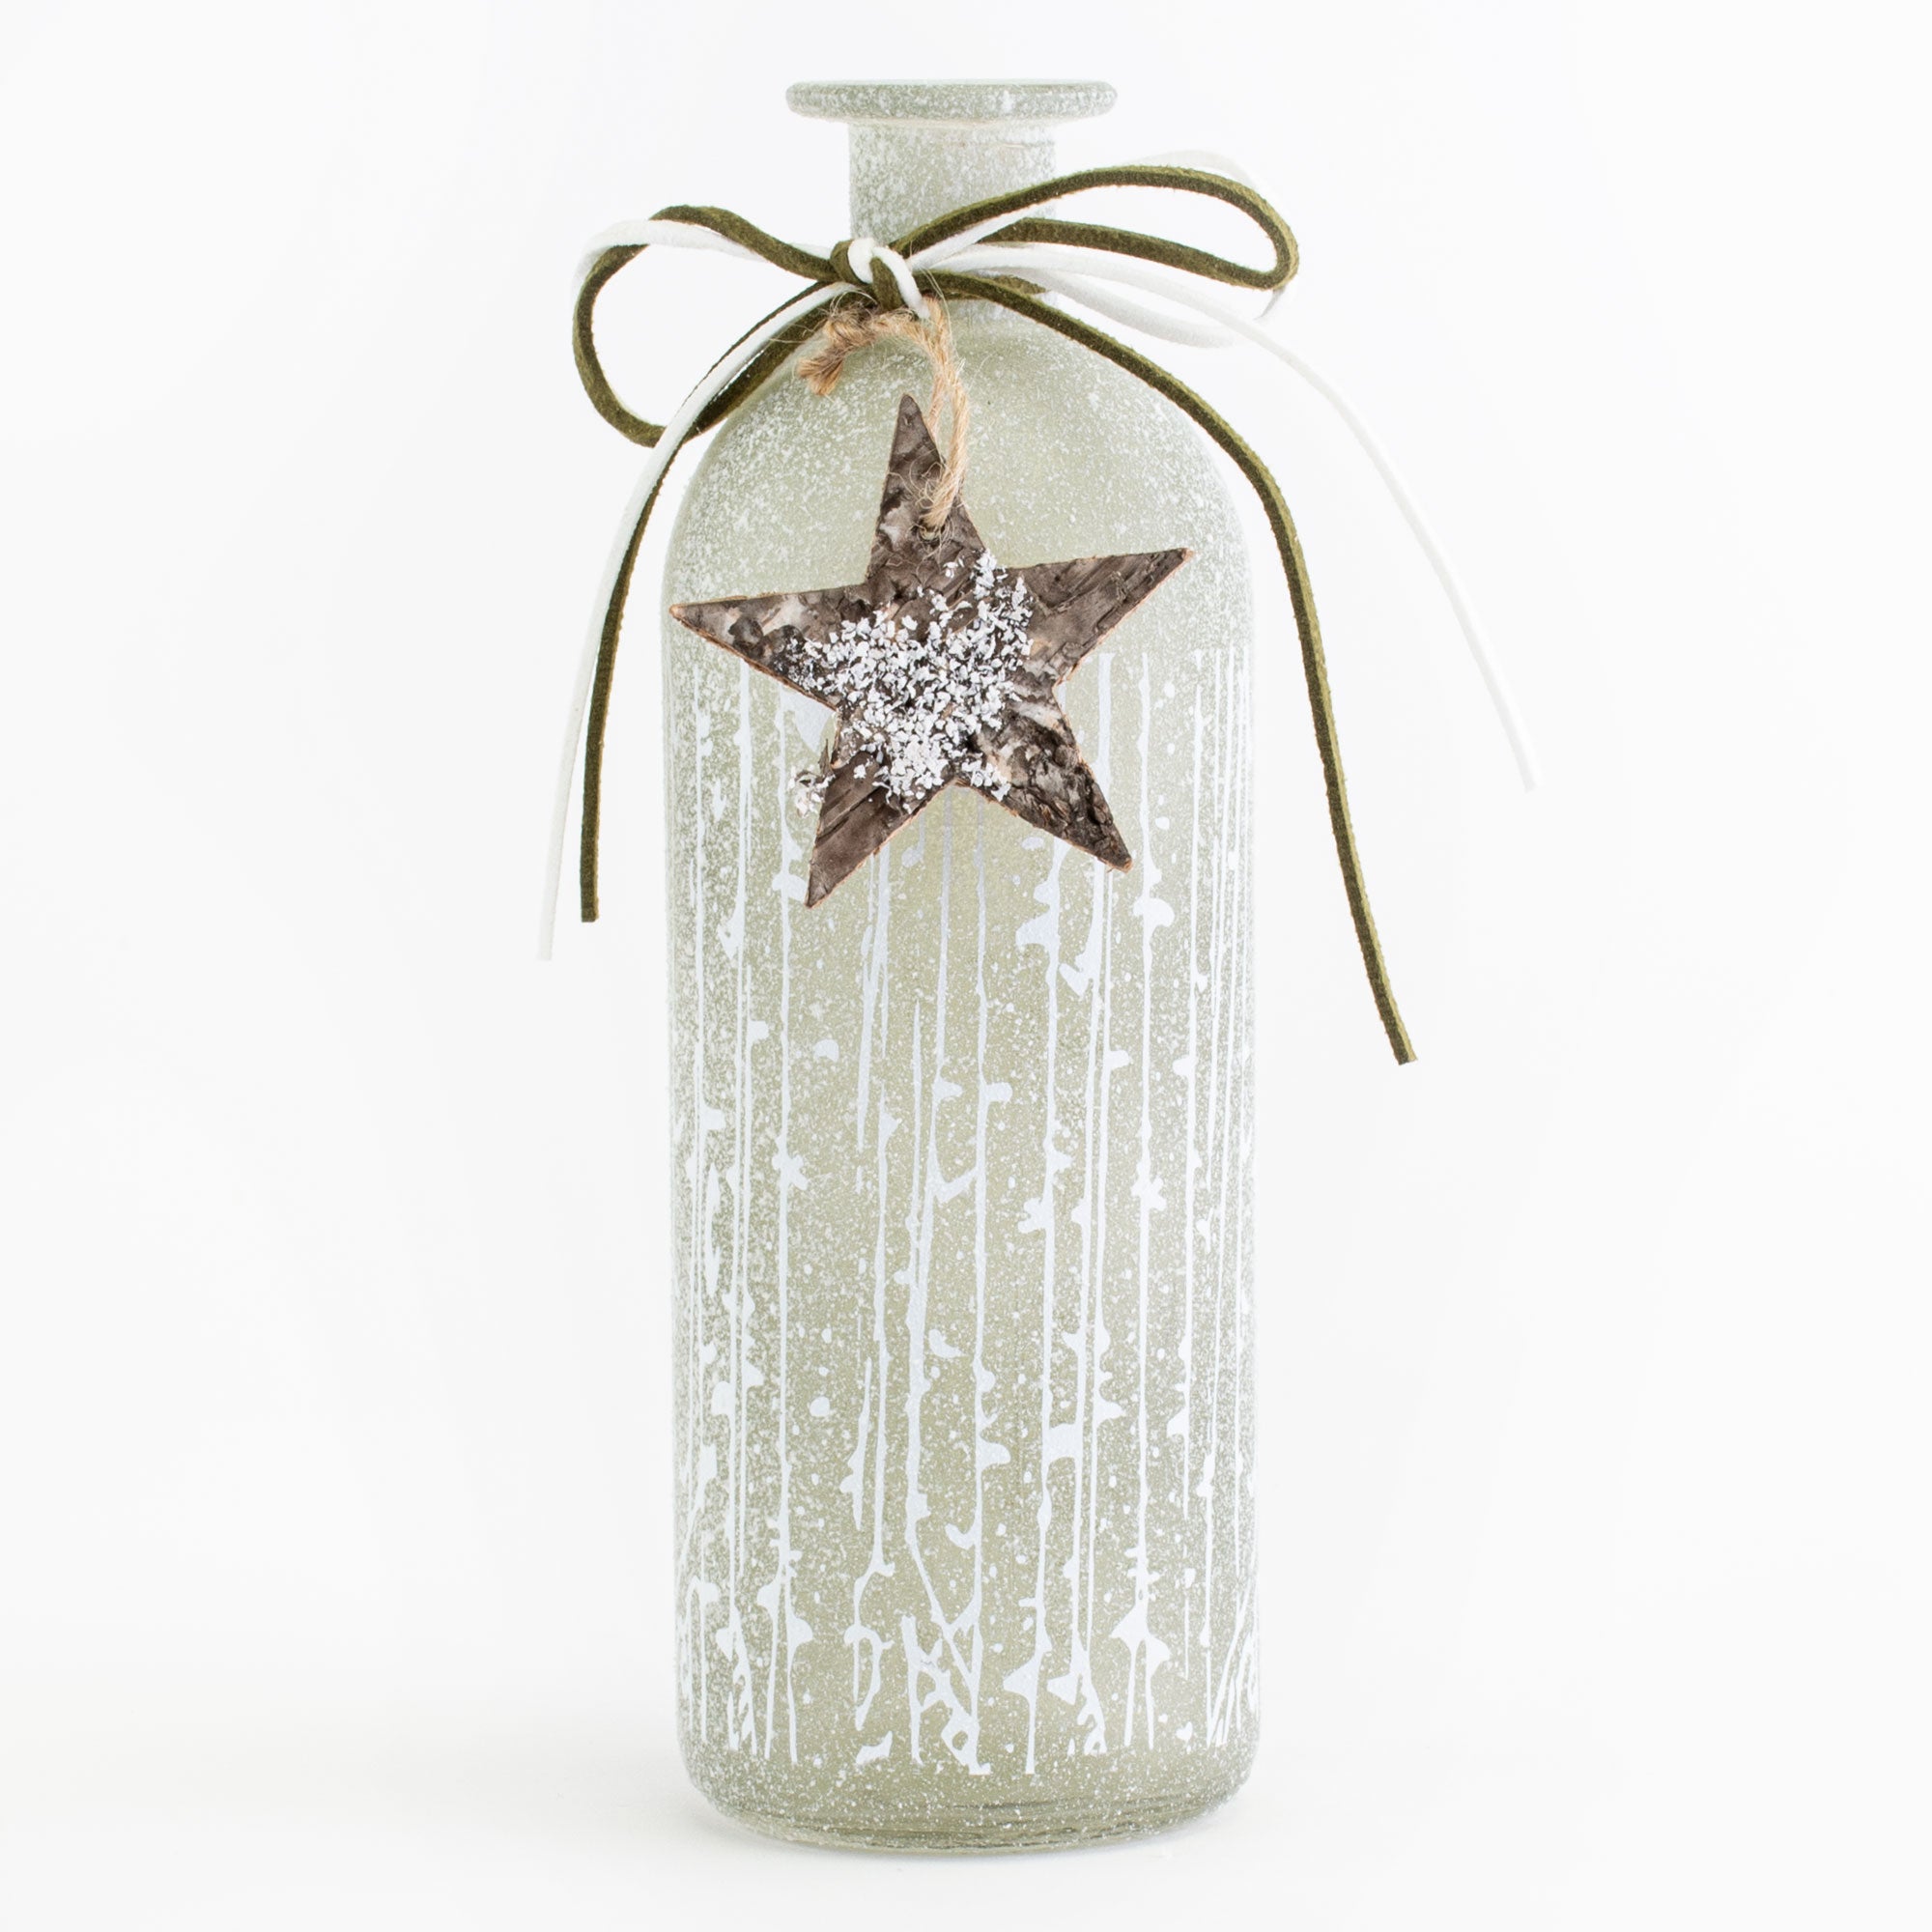 This image shows a pale green, frosted glass vase, with a medium wooden star tied around its neck, against a white background